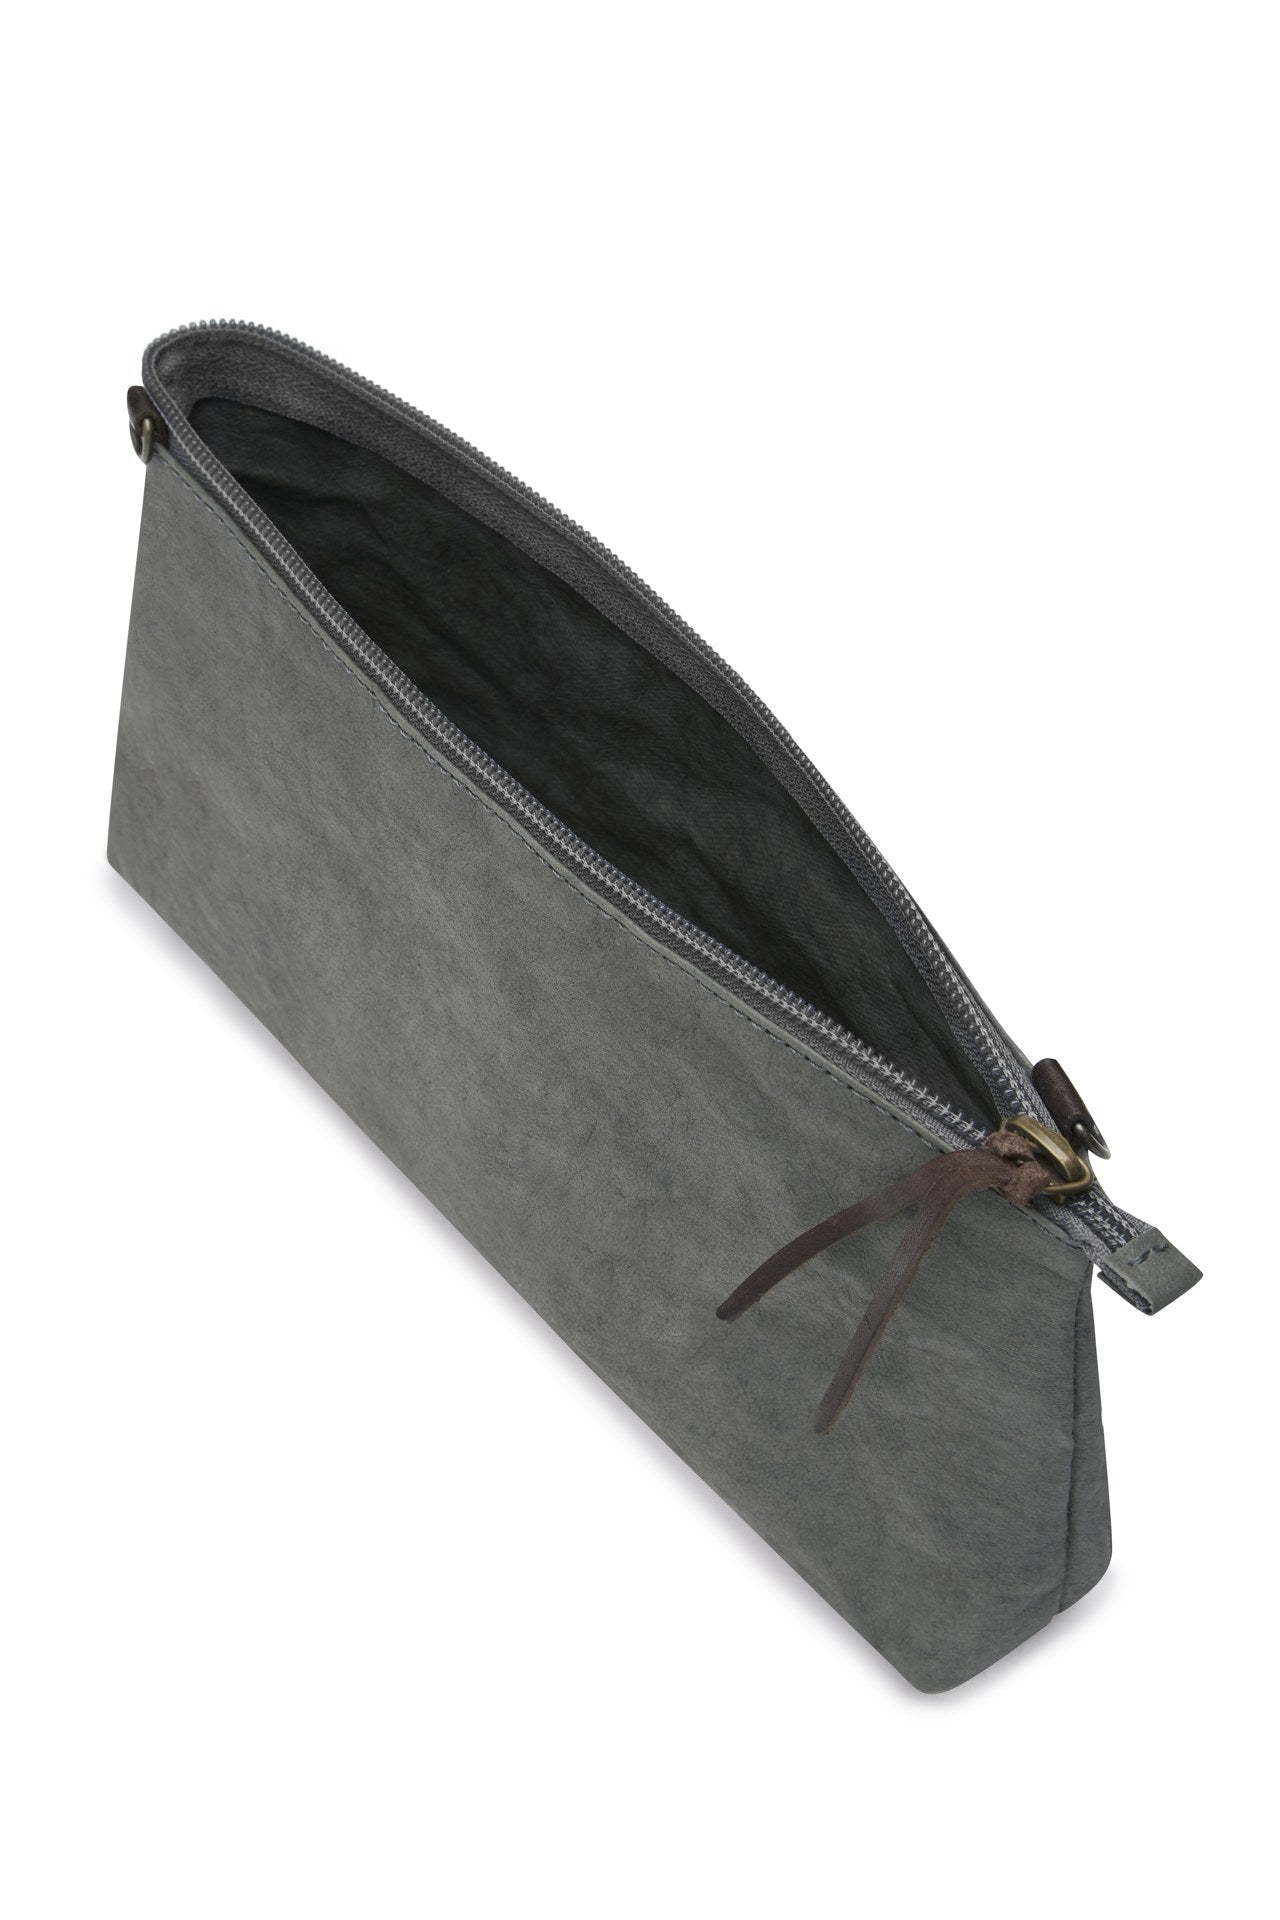 A washable paper bag in grey is shown with the strap removed, open and unzipped with a chocolate brown zip toggle.